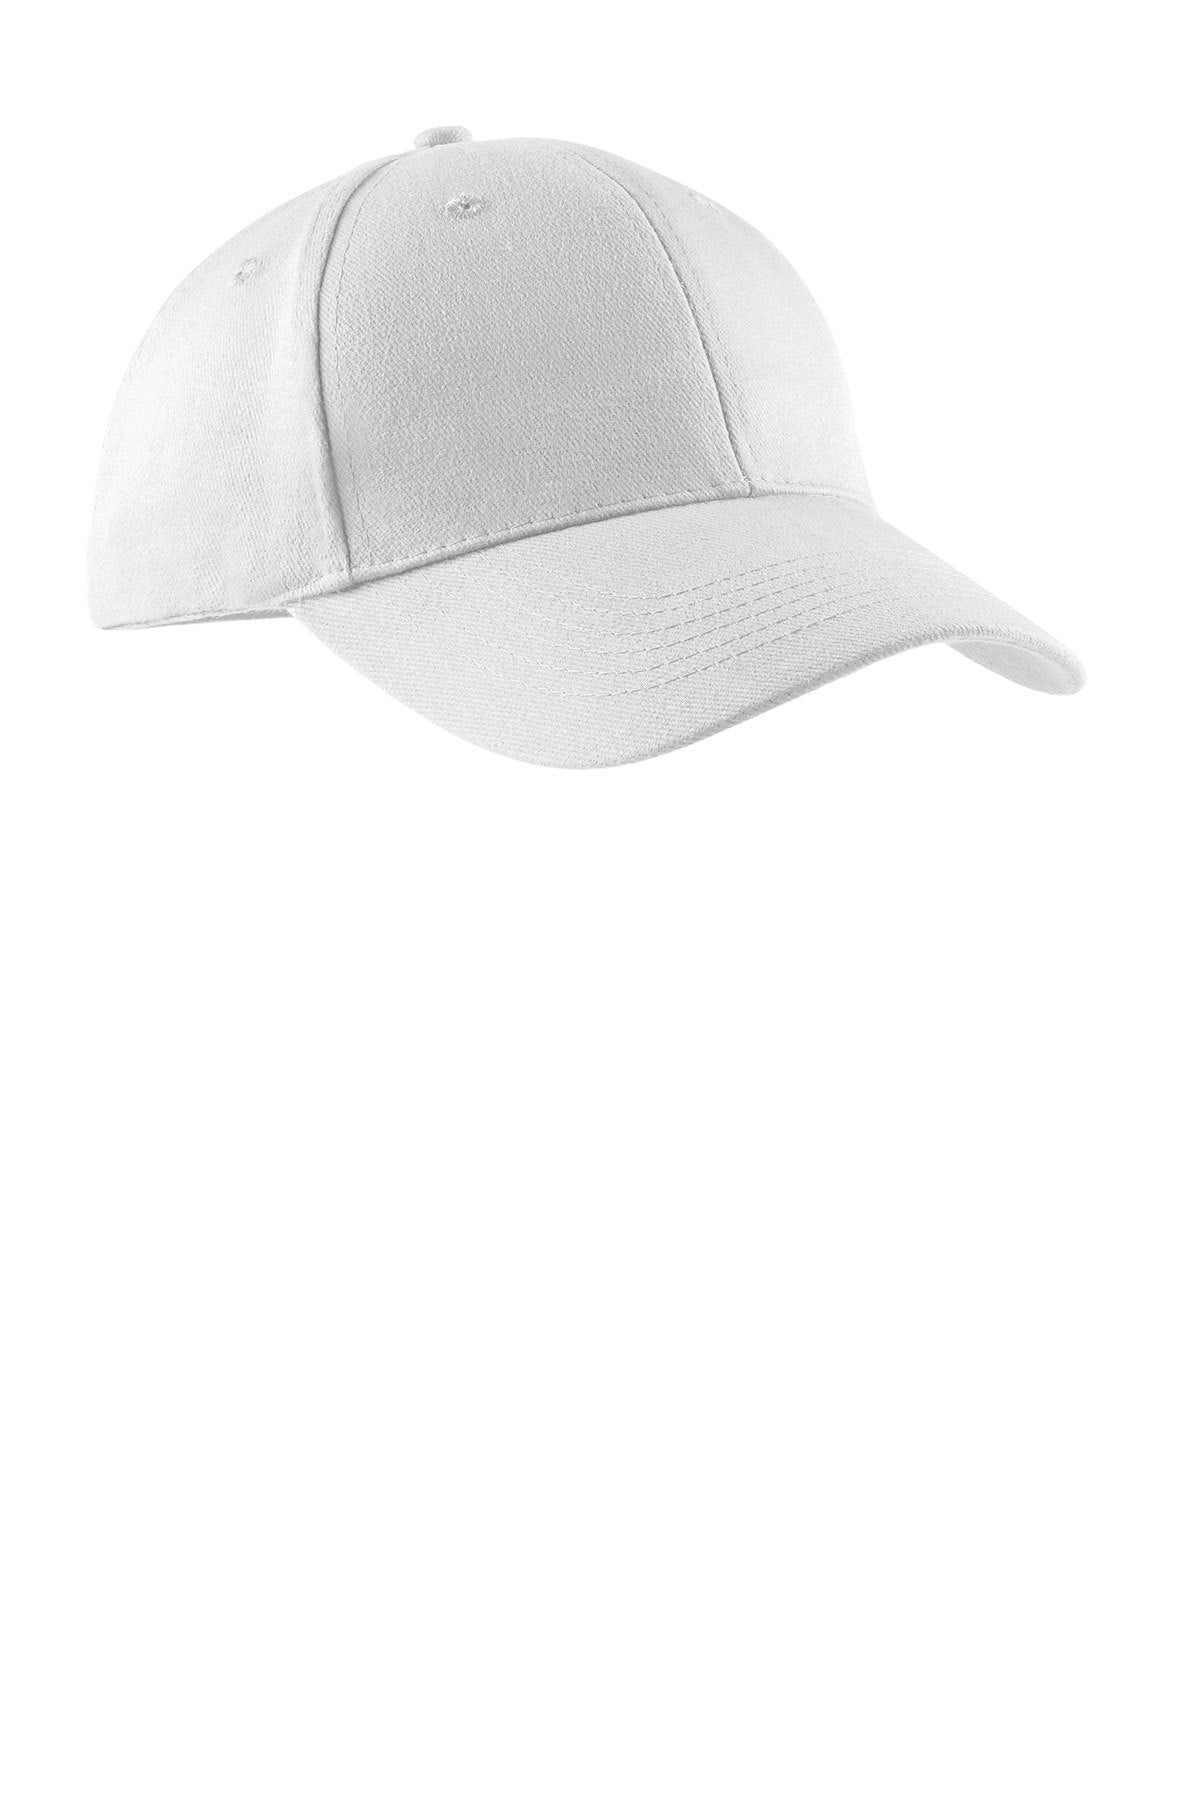 Port & Company Brushed Twill Branded Caps, White